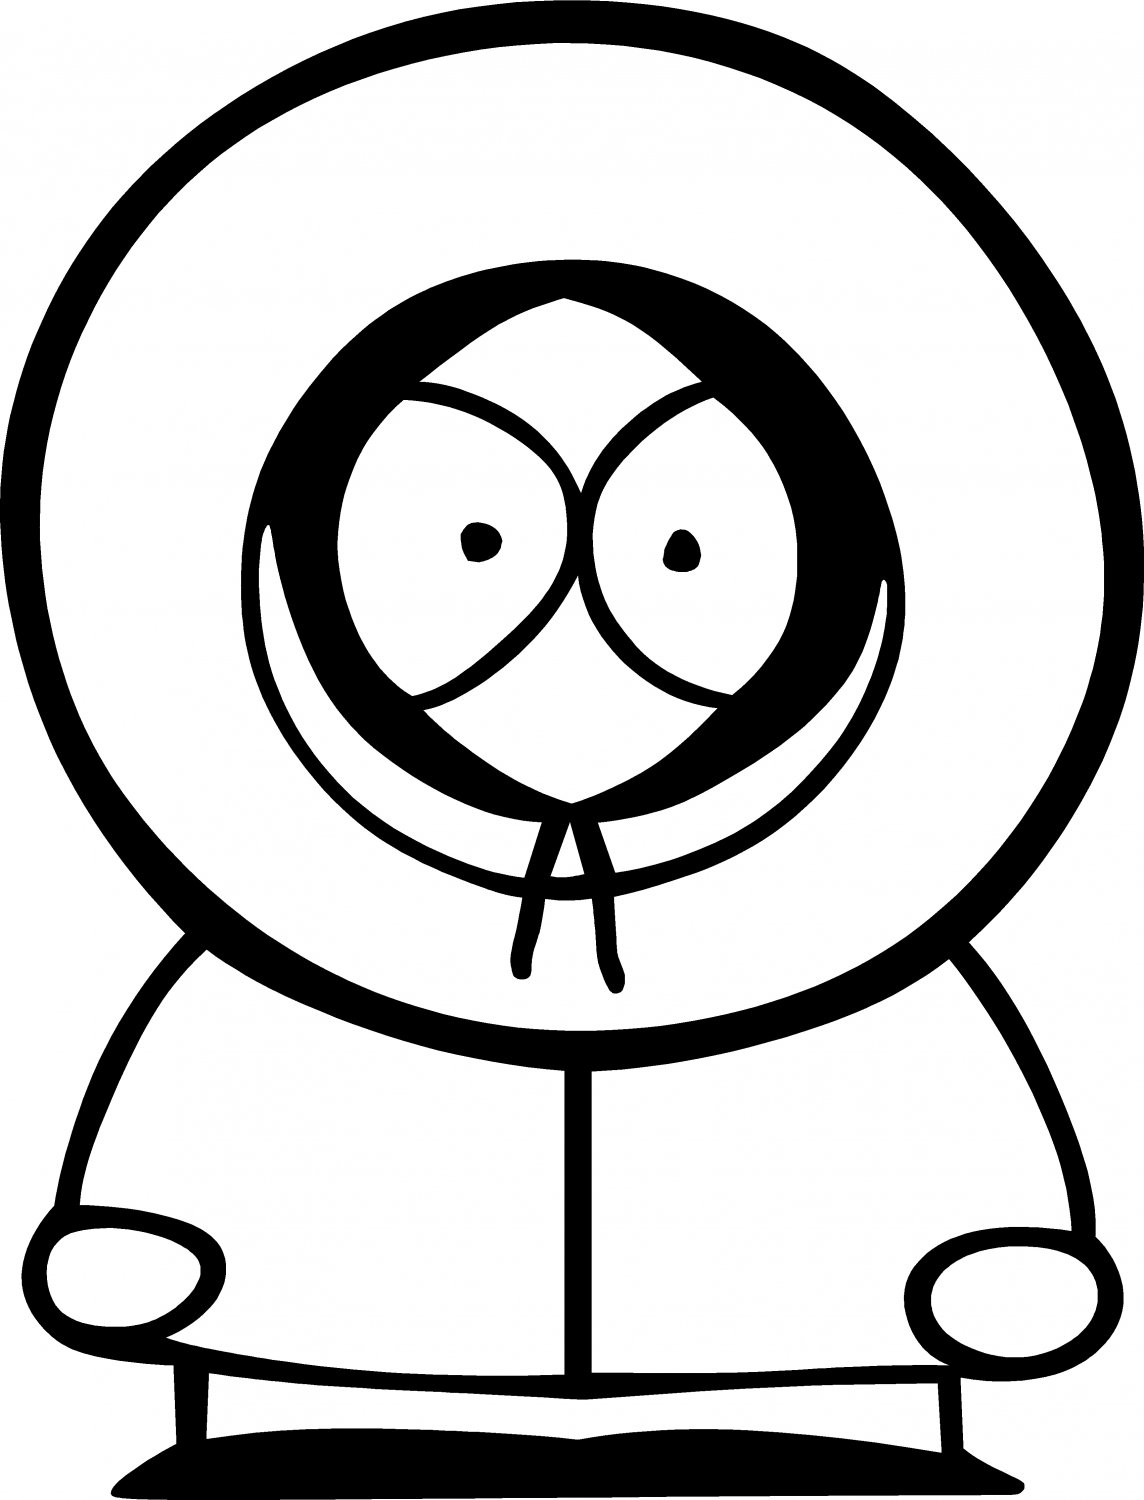 kenny from south park vinyl decal sticker